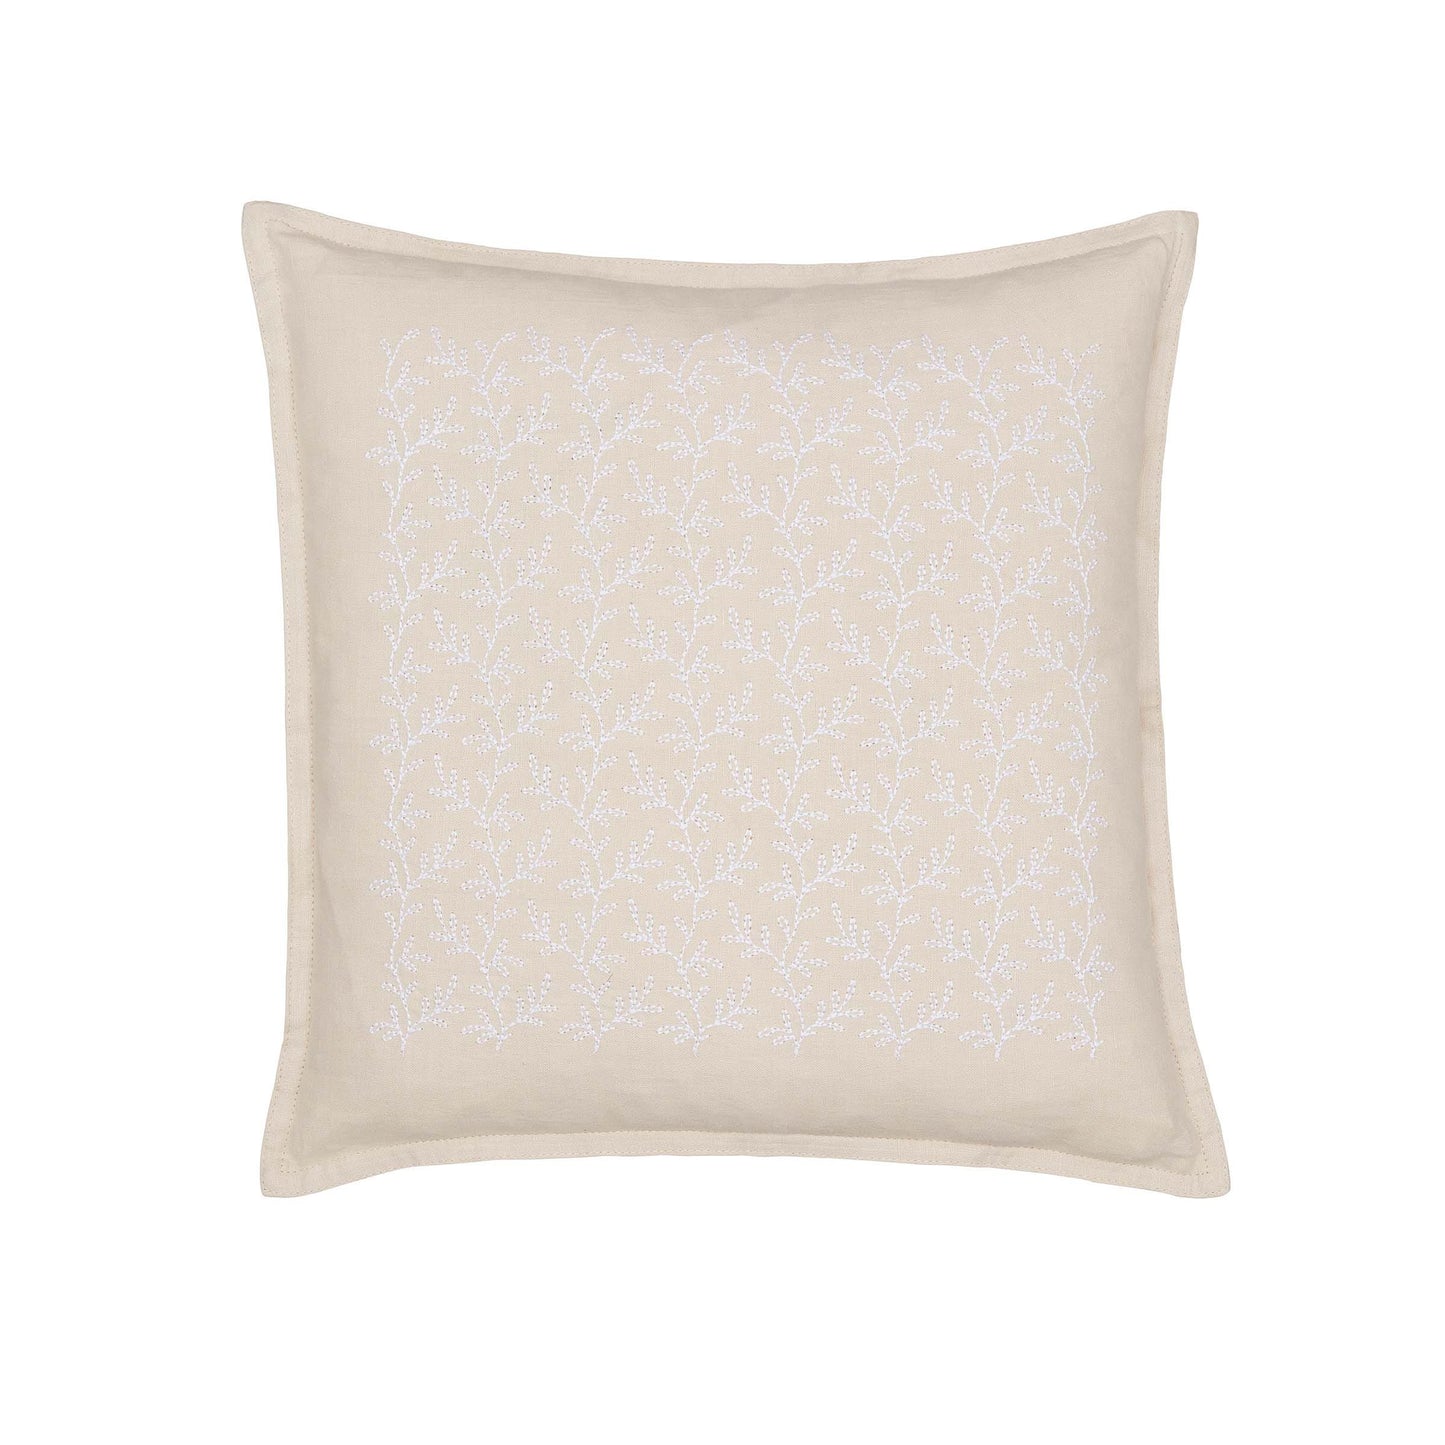 Embroidered Thyme Cushion in Linen